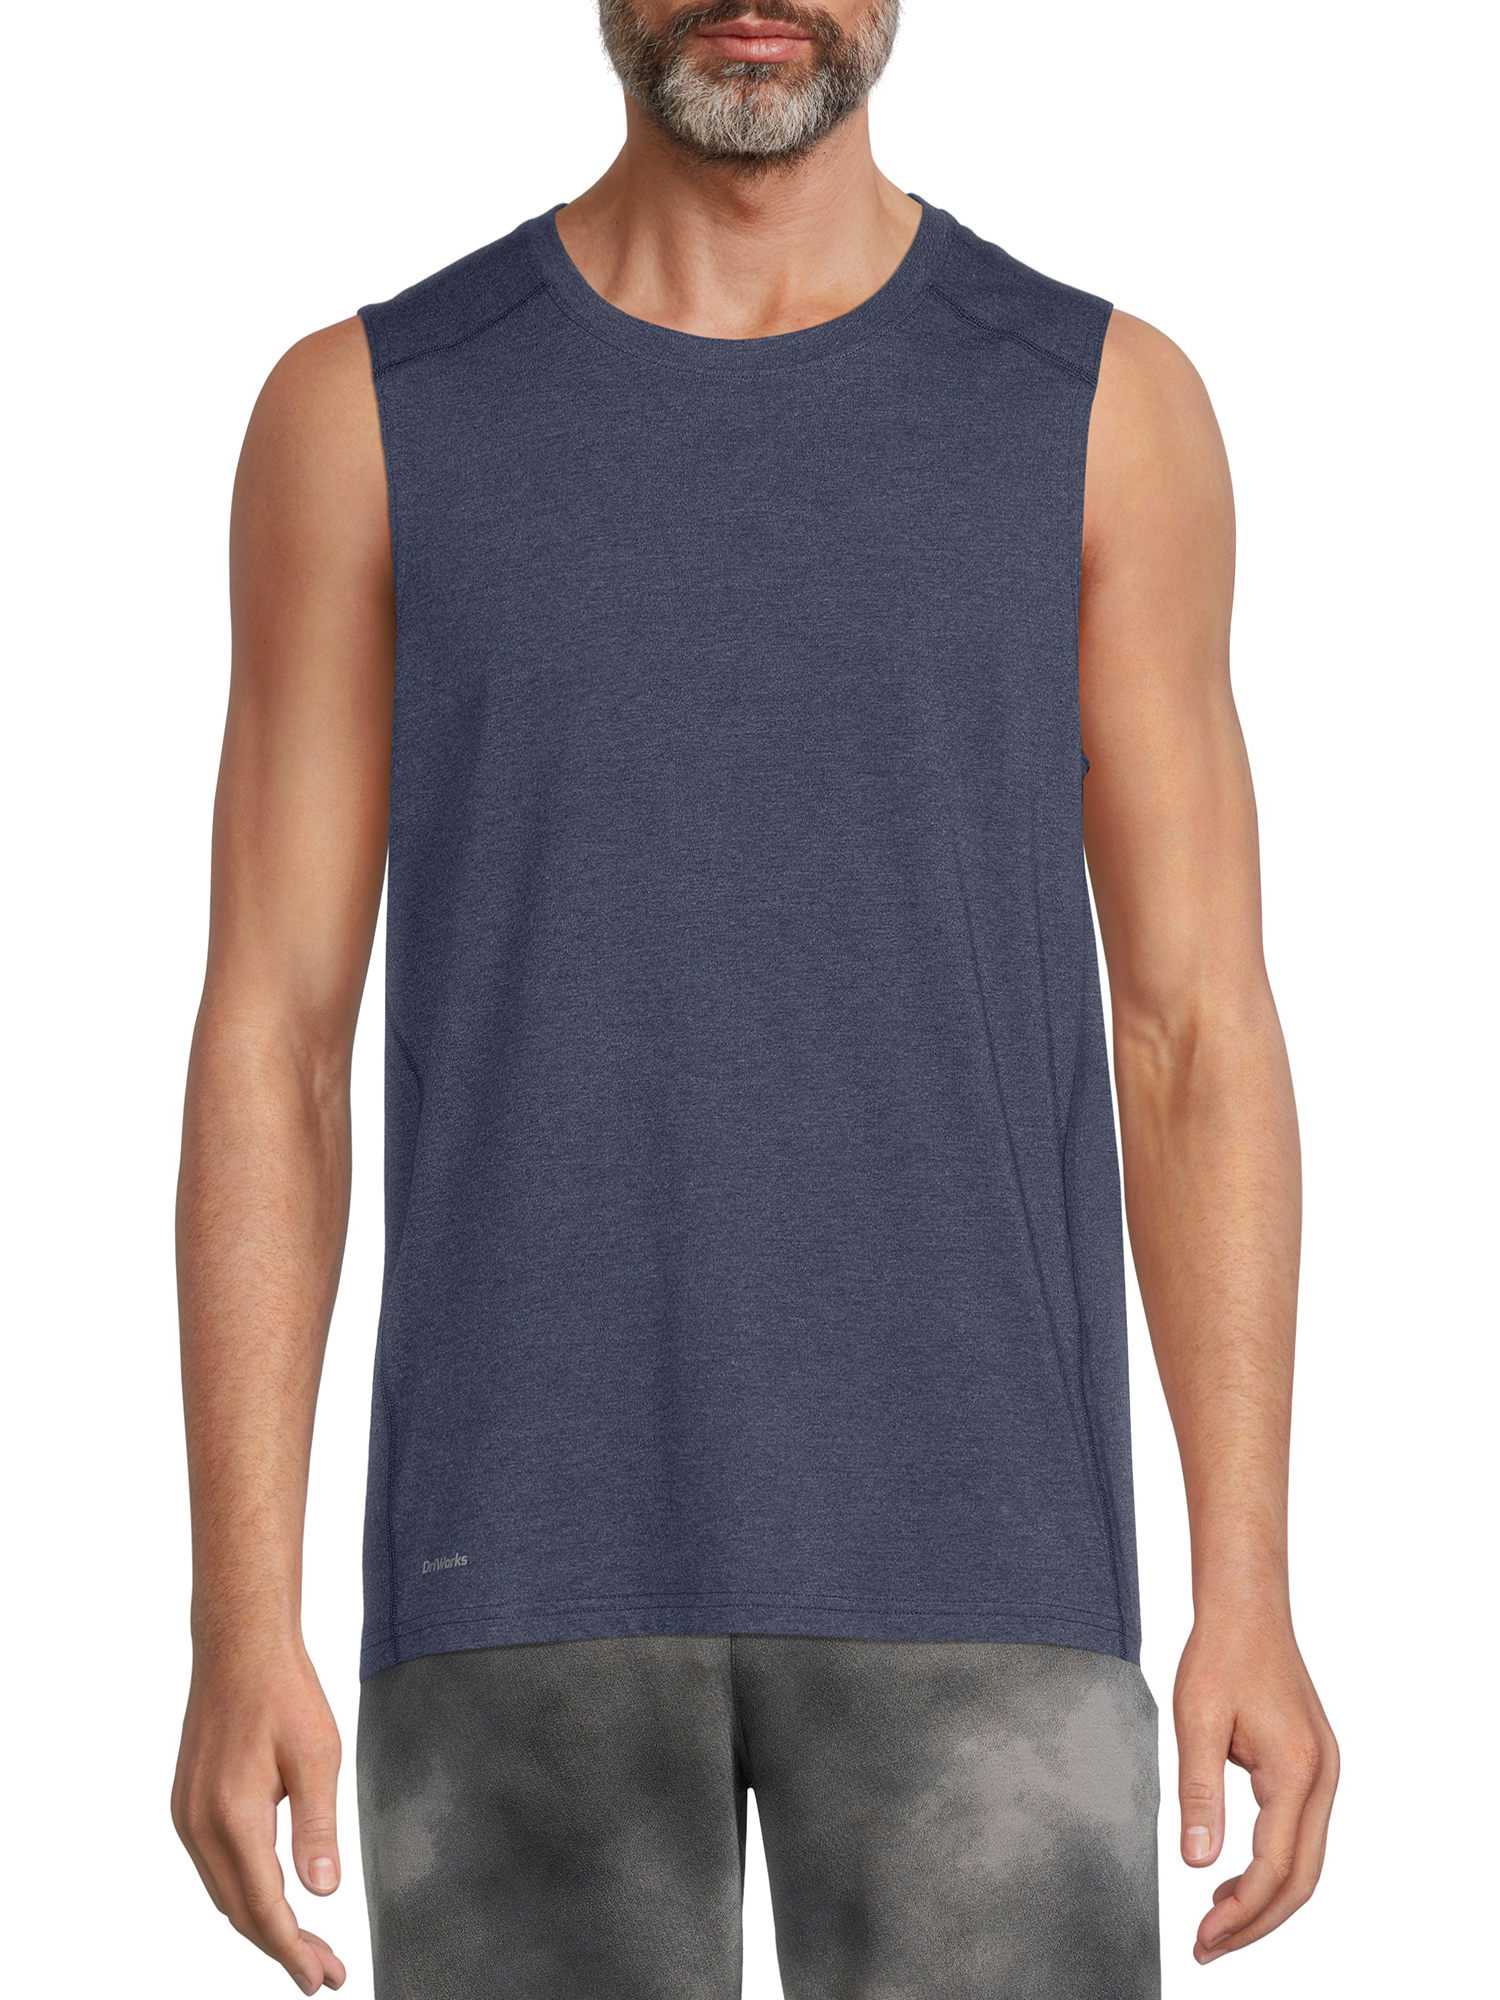 Athletic Works Men's and Big Men's Active Tri-Blend Muscle Tank Top ...